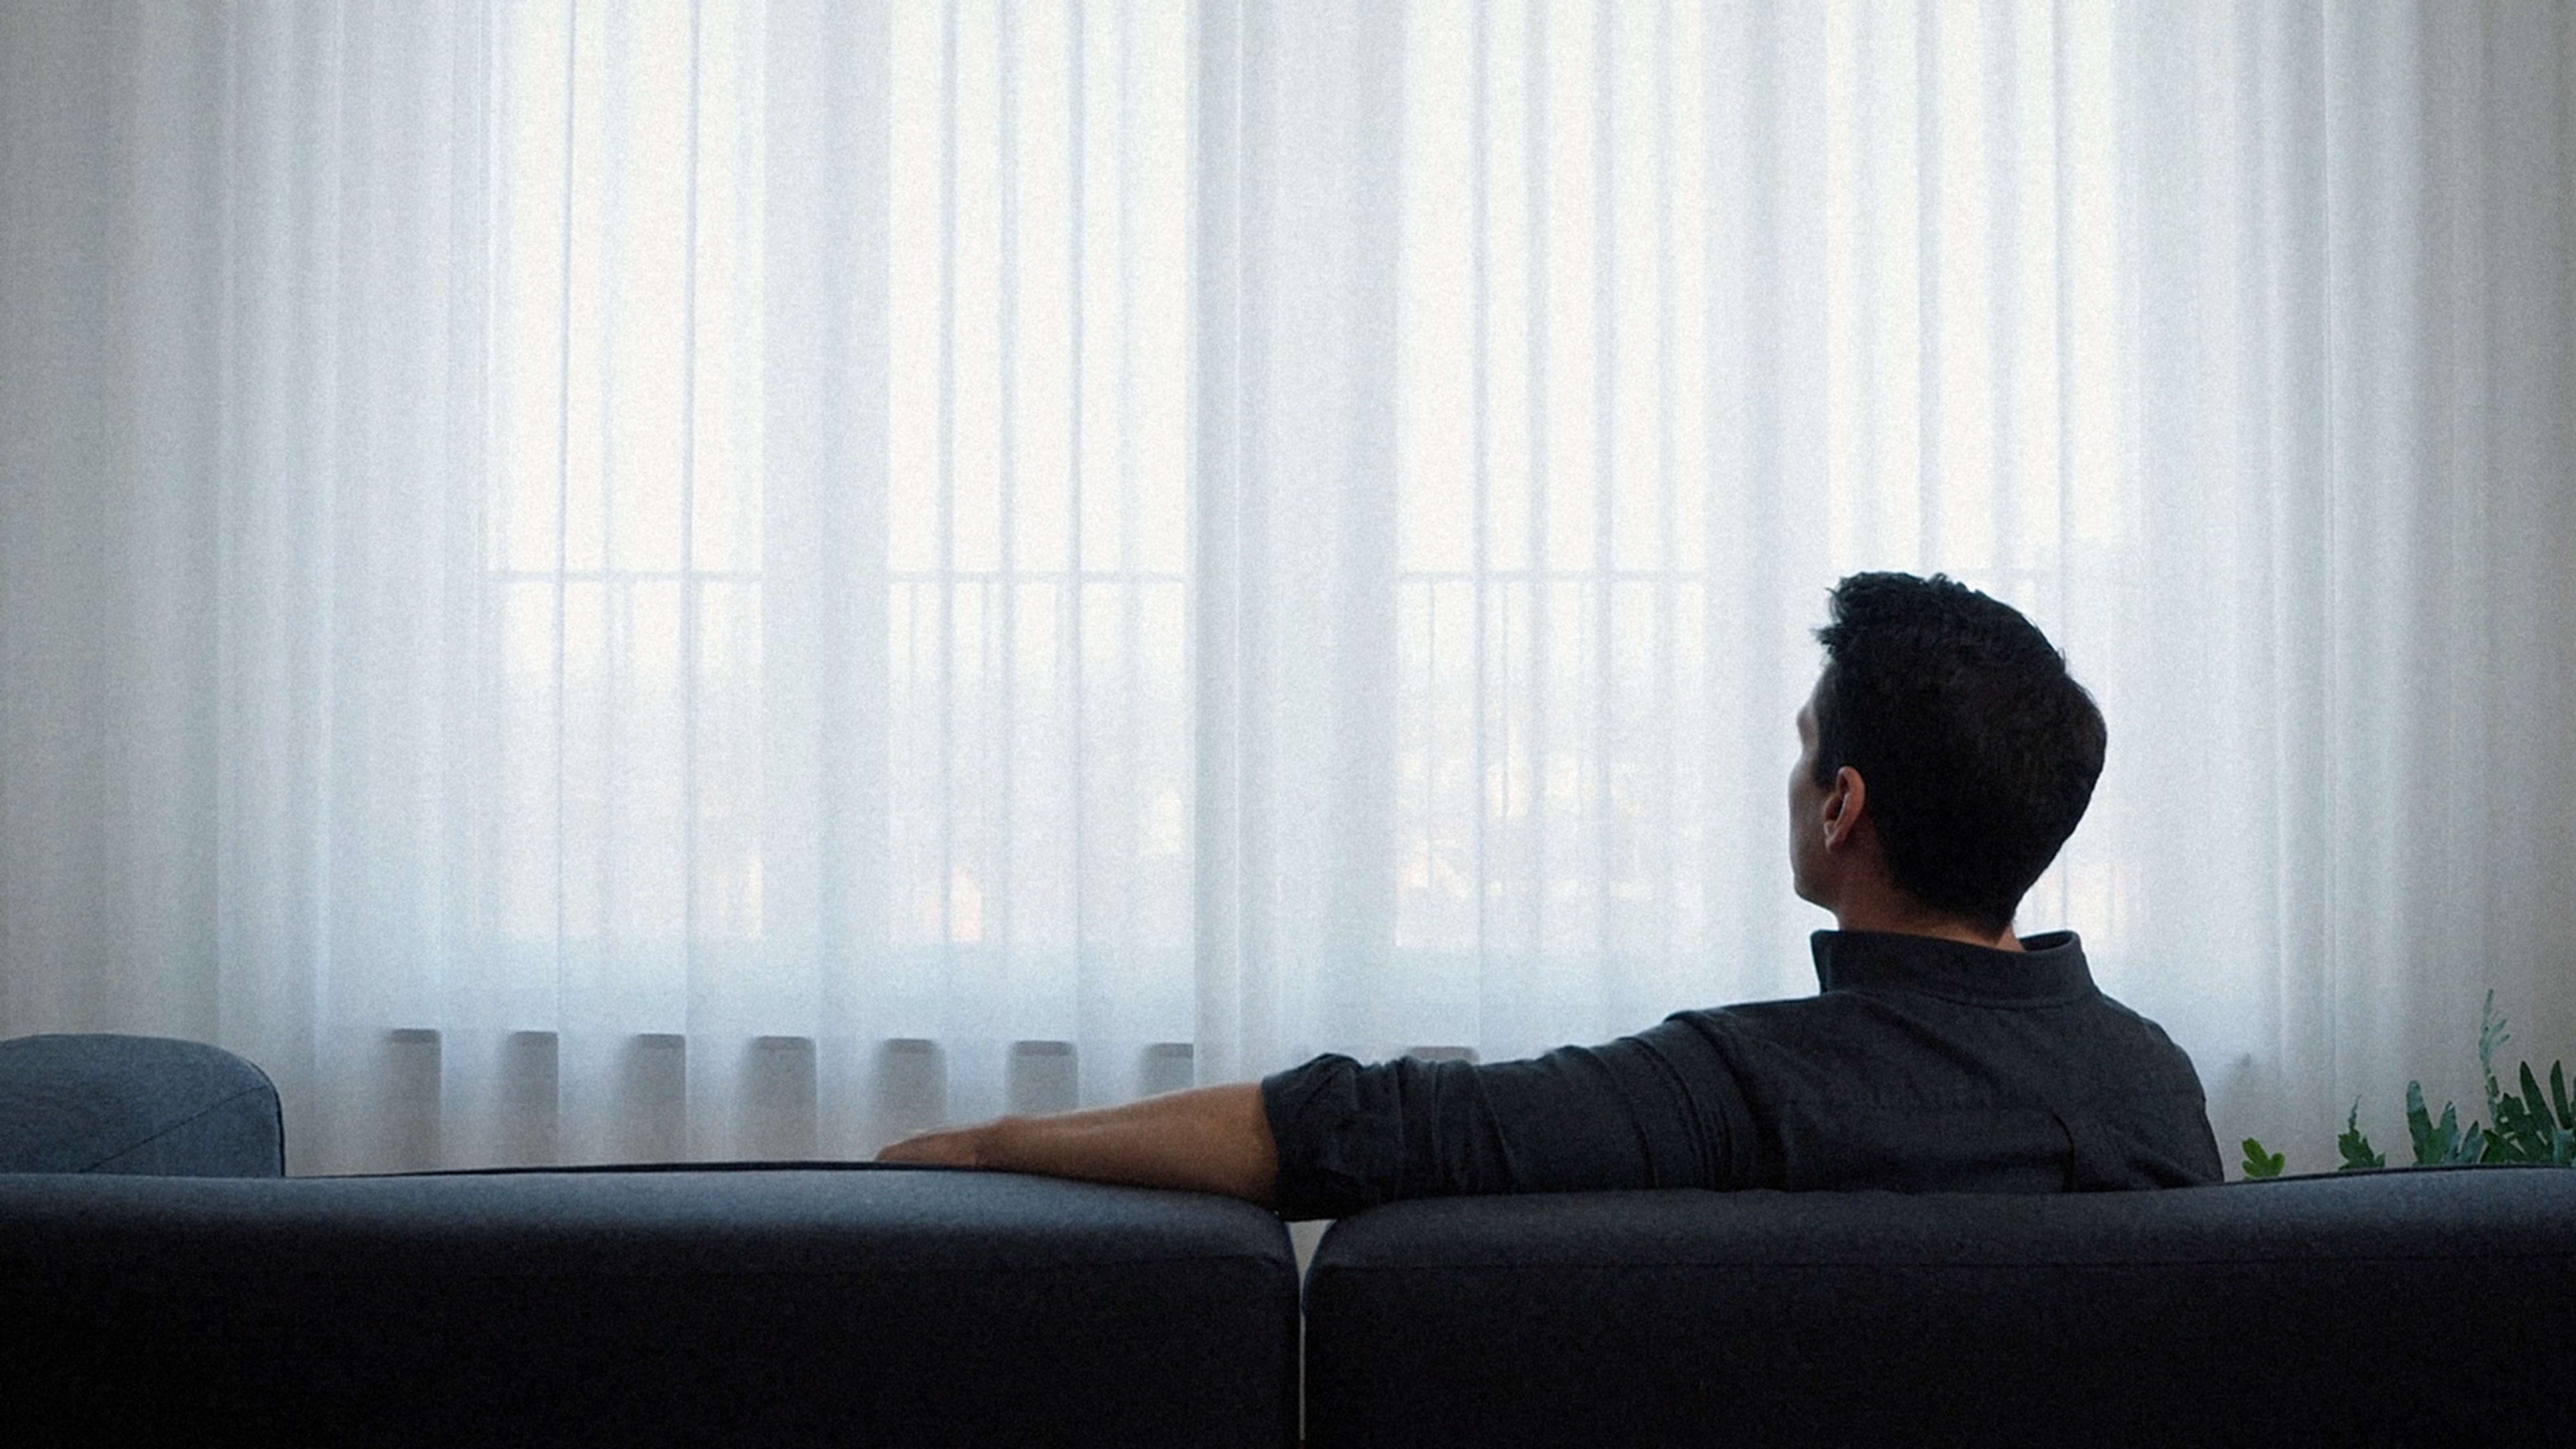 Ikea’s new curtains purify the air inside your house